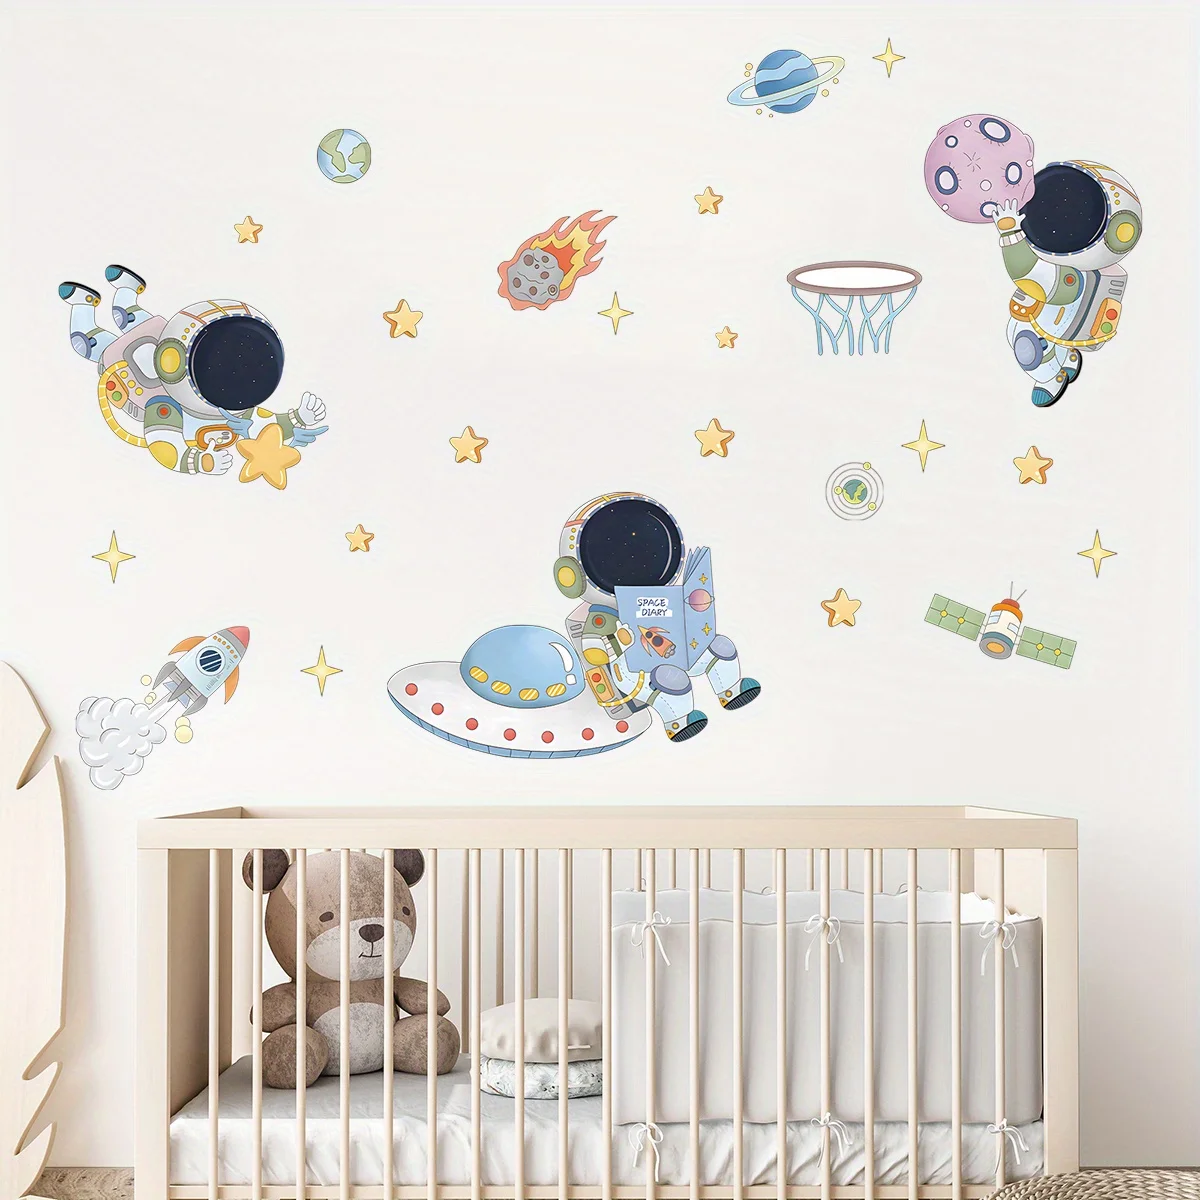 Cartoon Cute Astronaut Planet Rocket Star Space Wall Stickers Removable for Bedroom Living Room Nursery Decoration Wall Decal